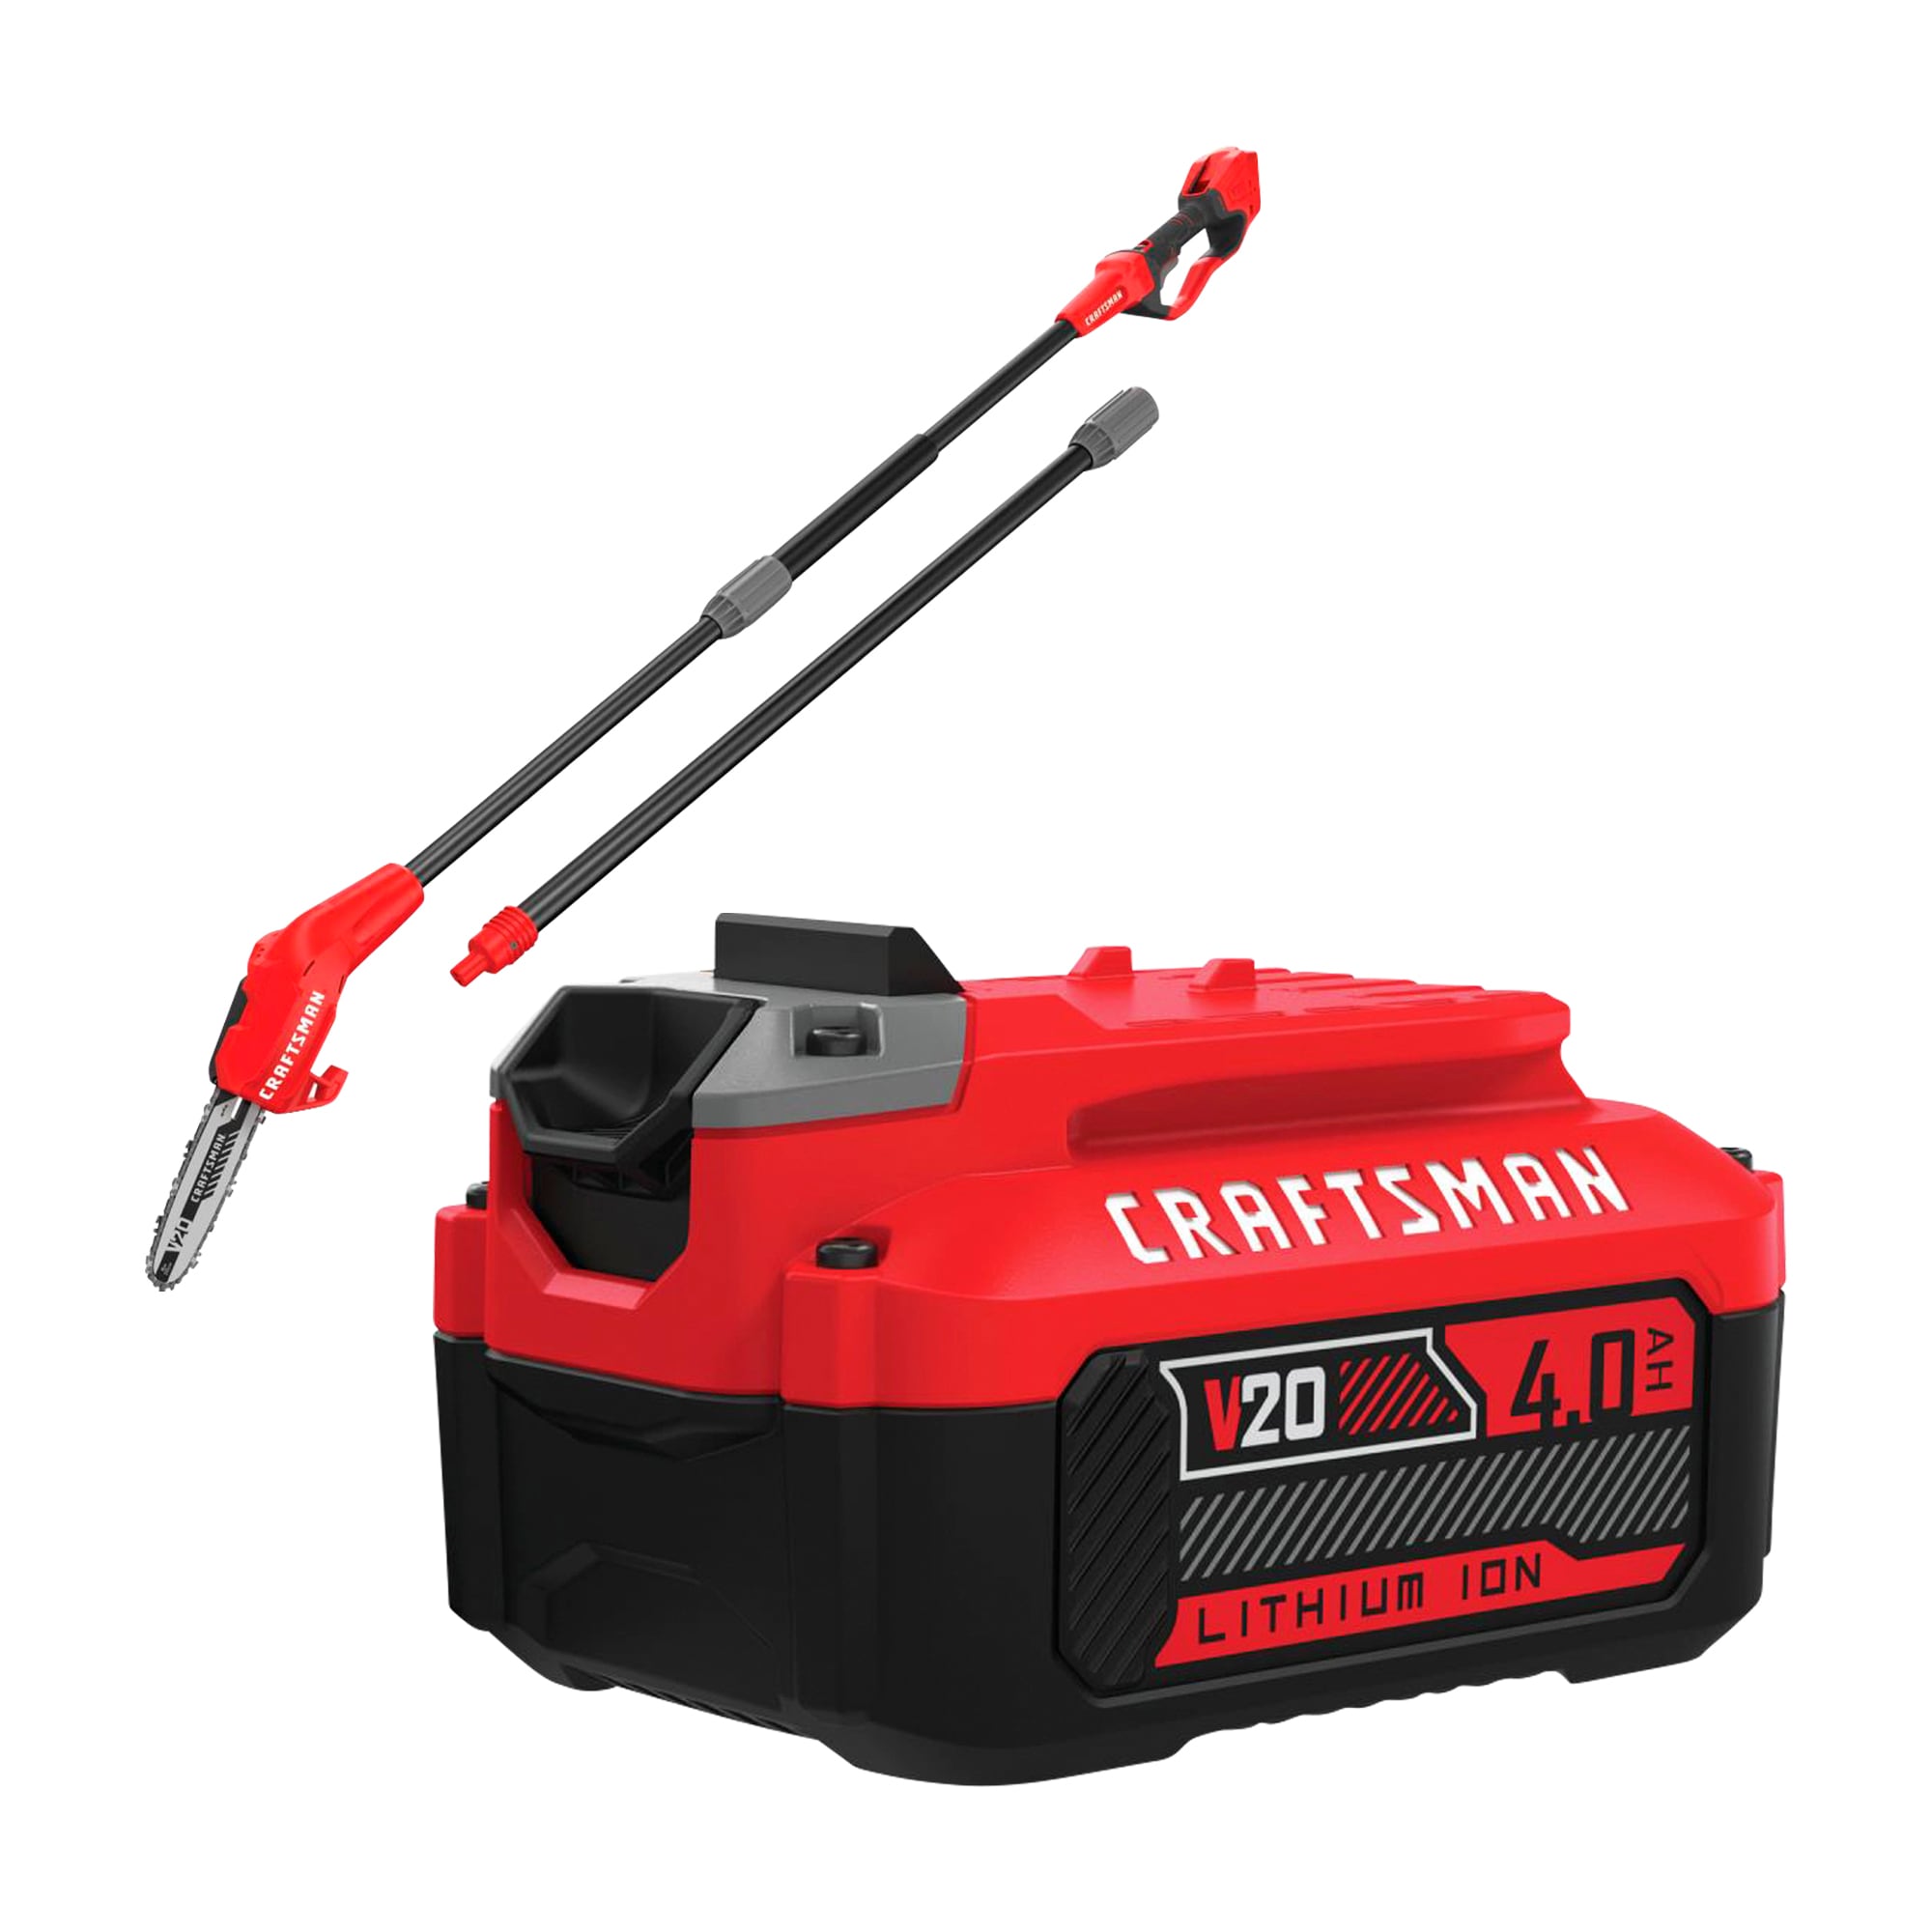 CRAFTSMAN V20 20-Volt 8-in Cordless Electric Pole Saw & 20-Volt Max 4 Ah Rechargeable Lithium Ion (Li-Ion) Cordless Power Equipment Battery